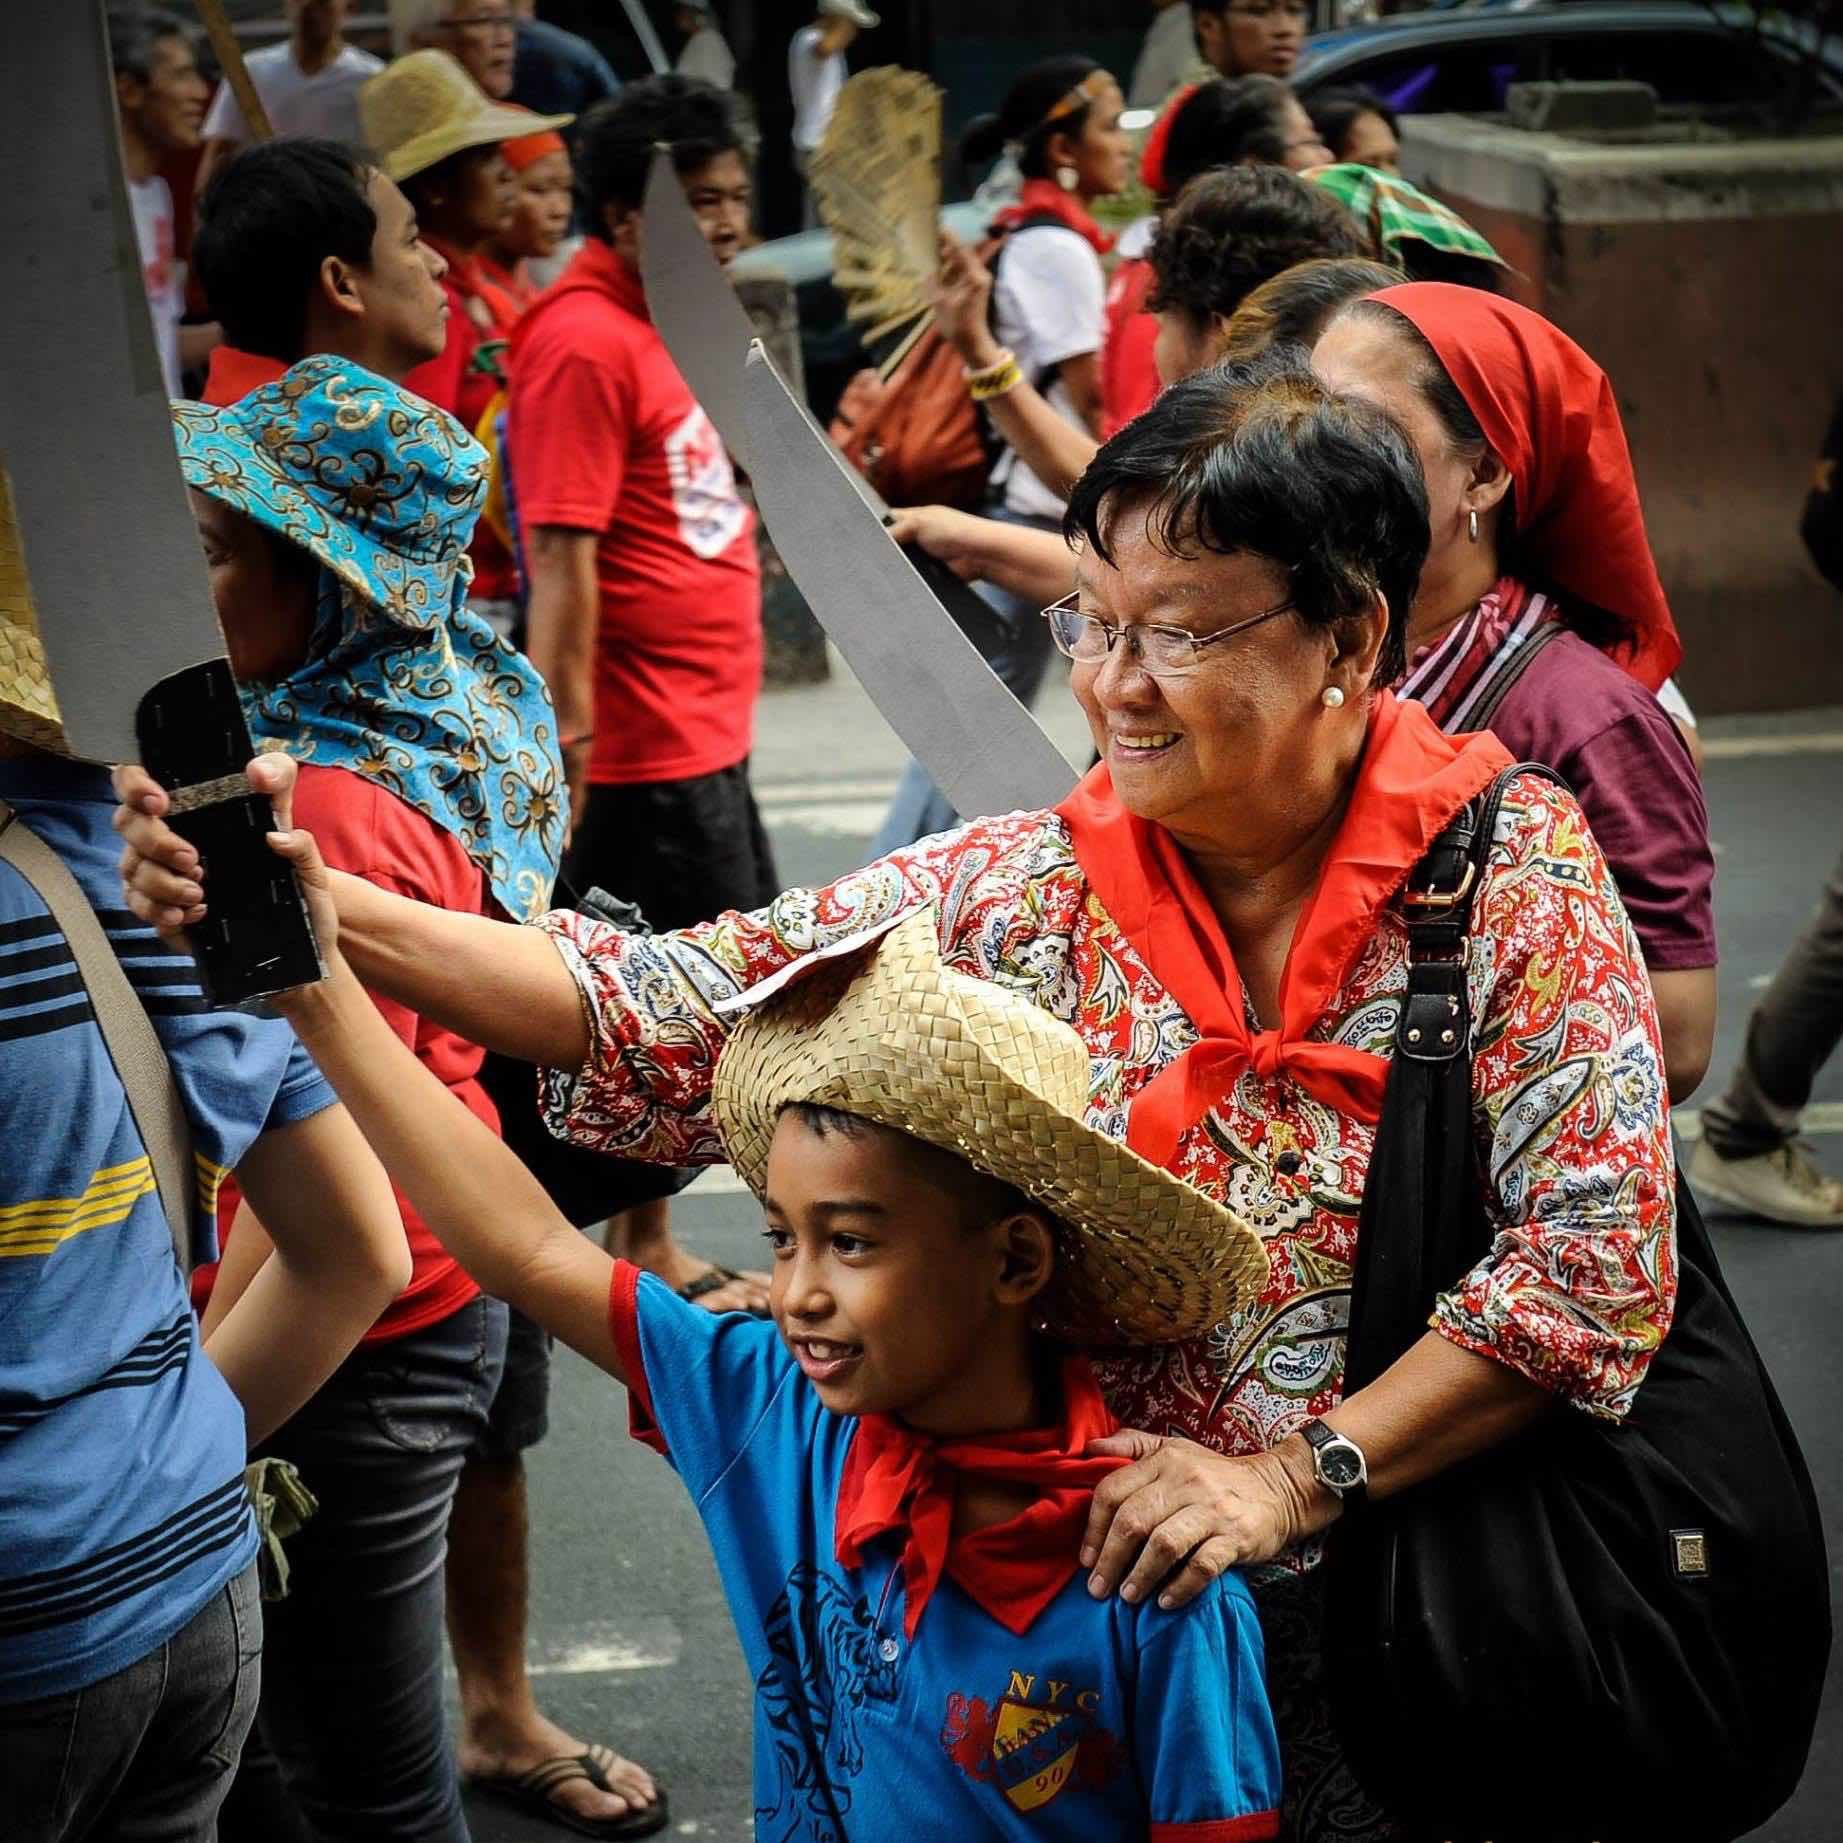 CONTINUING THE FIGHT. Prof Judy Taguiwalo joins other activists in a Bonifacio Day march to the historic Mendiola Bridge in Manila on November 30, 2015. File photo by Efren Ricalde 